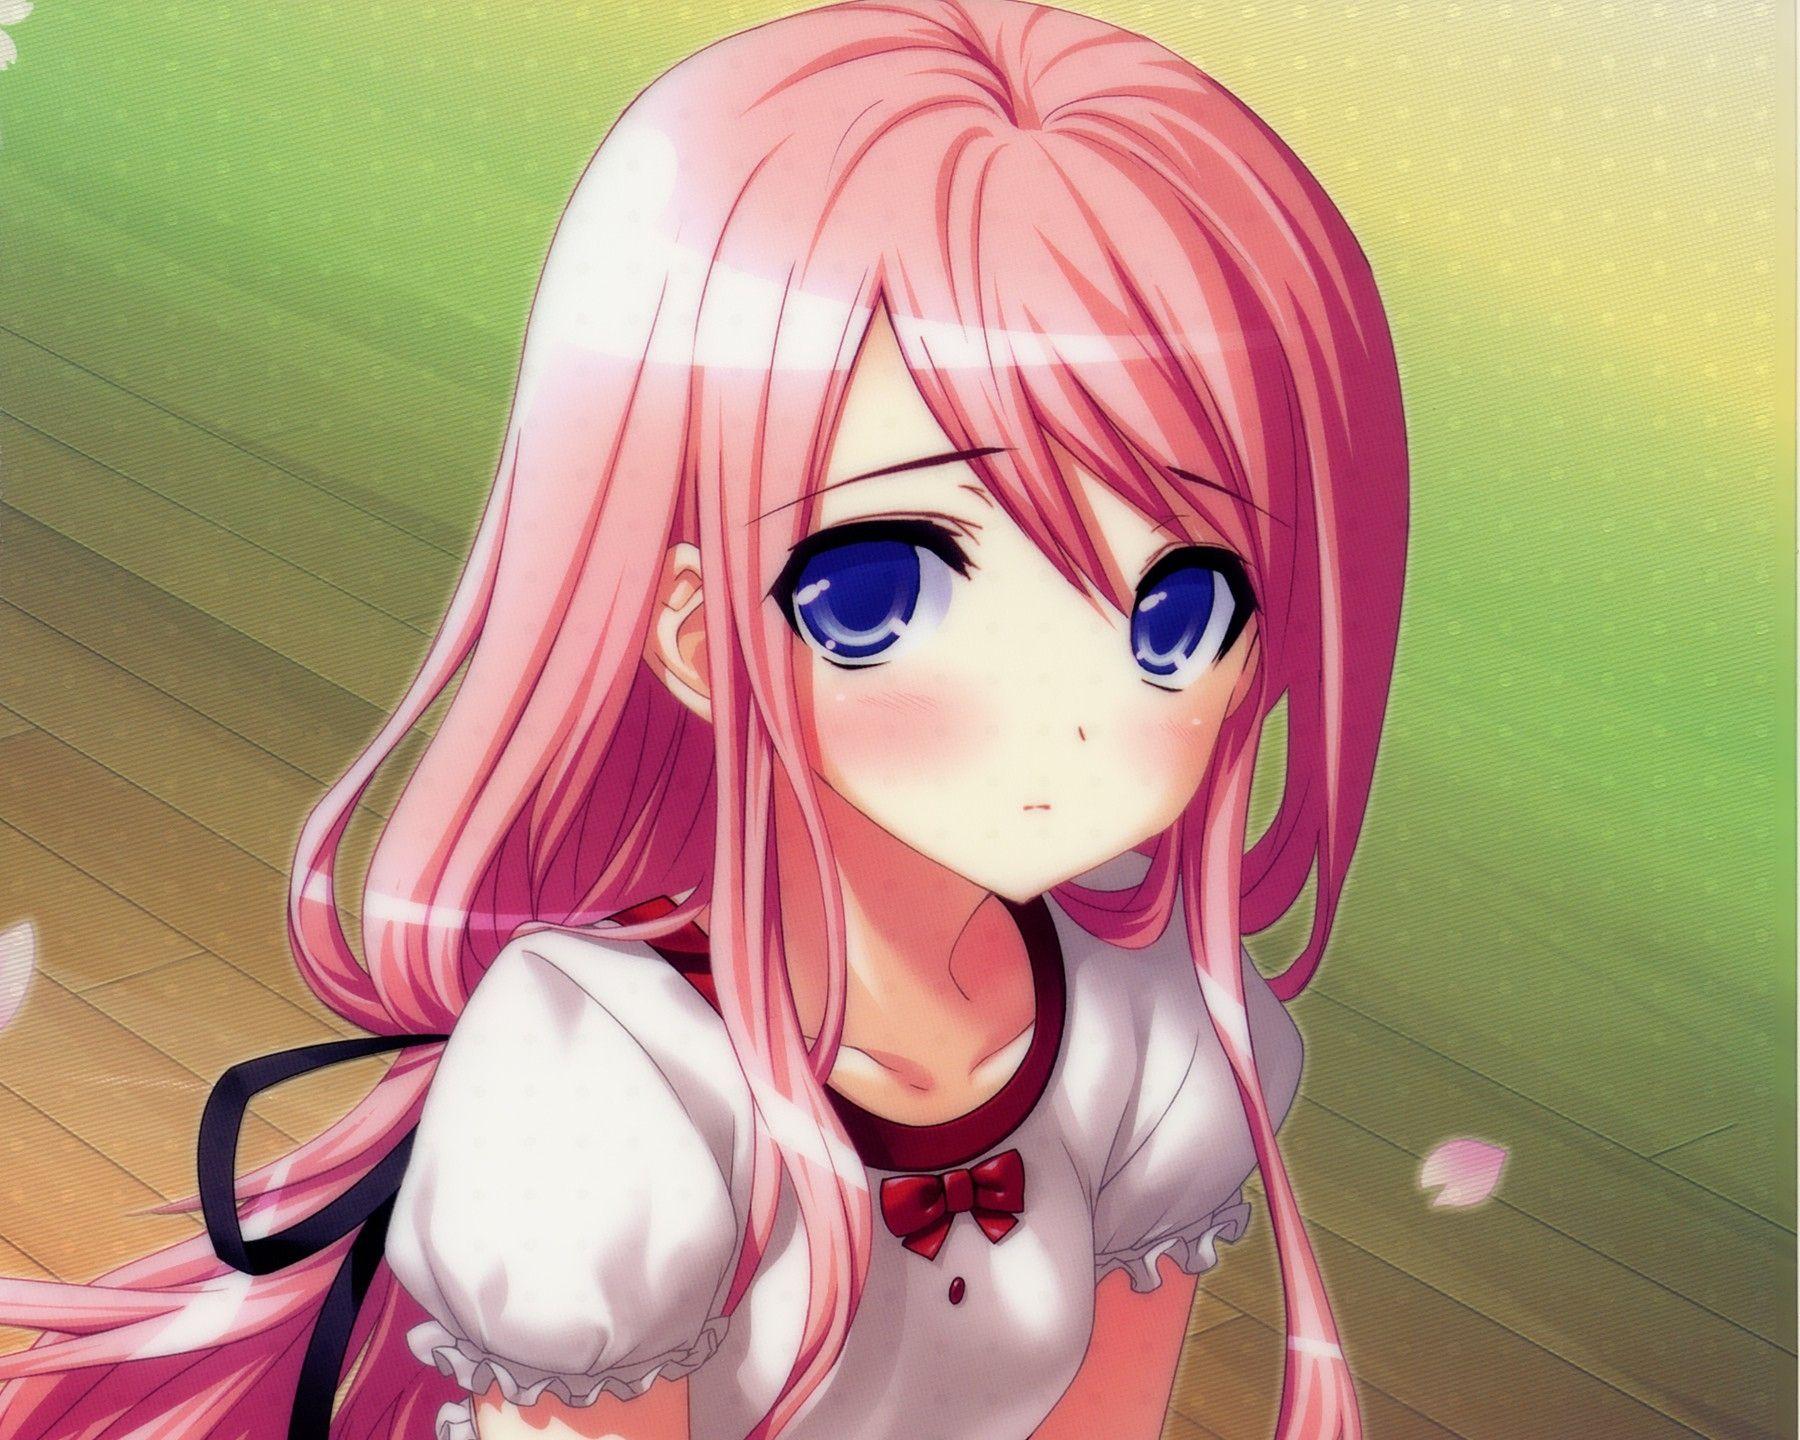 3. Anime Girl with Blue and Pink Hair - wide 5